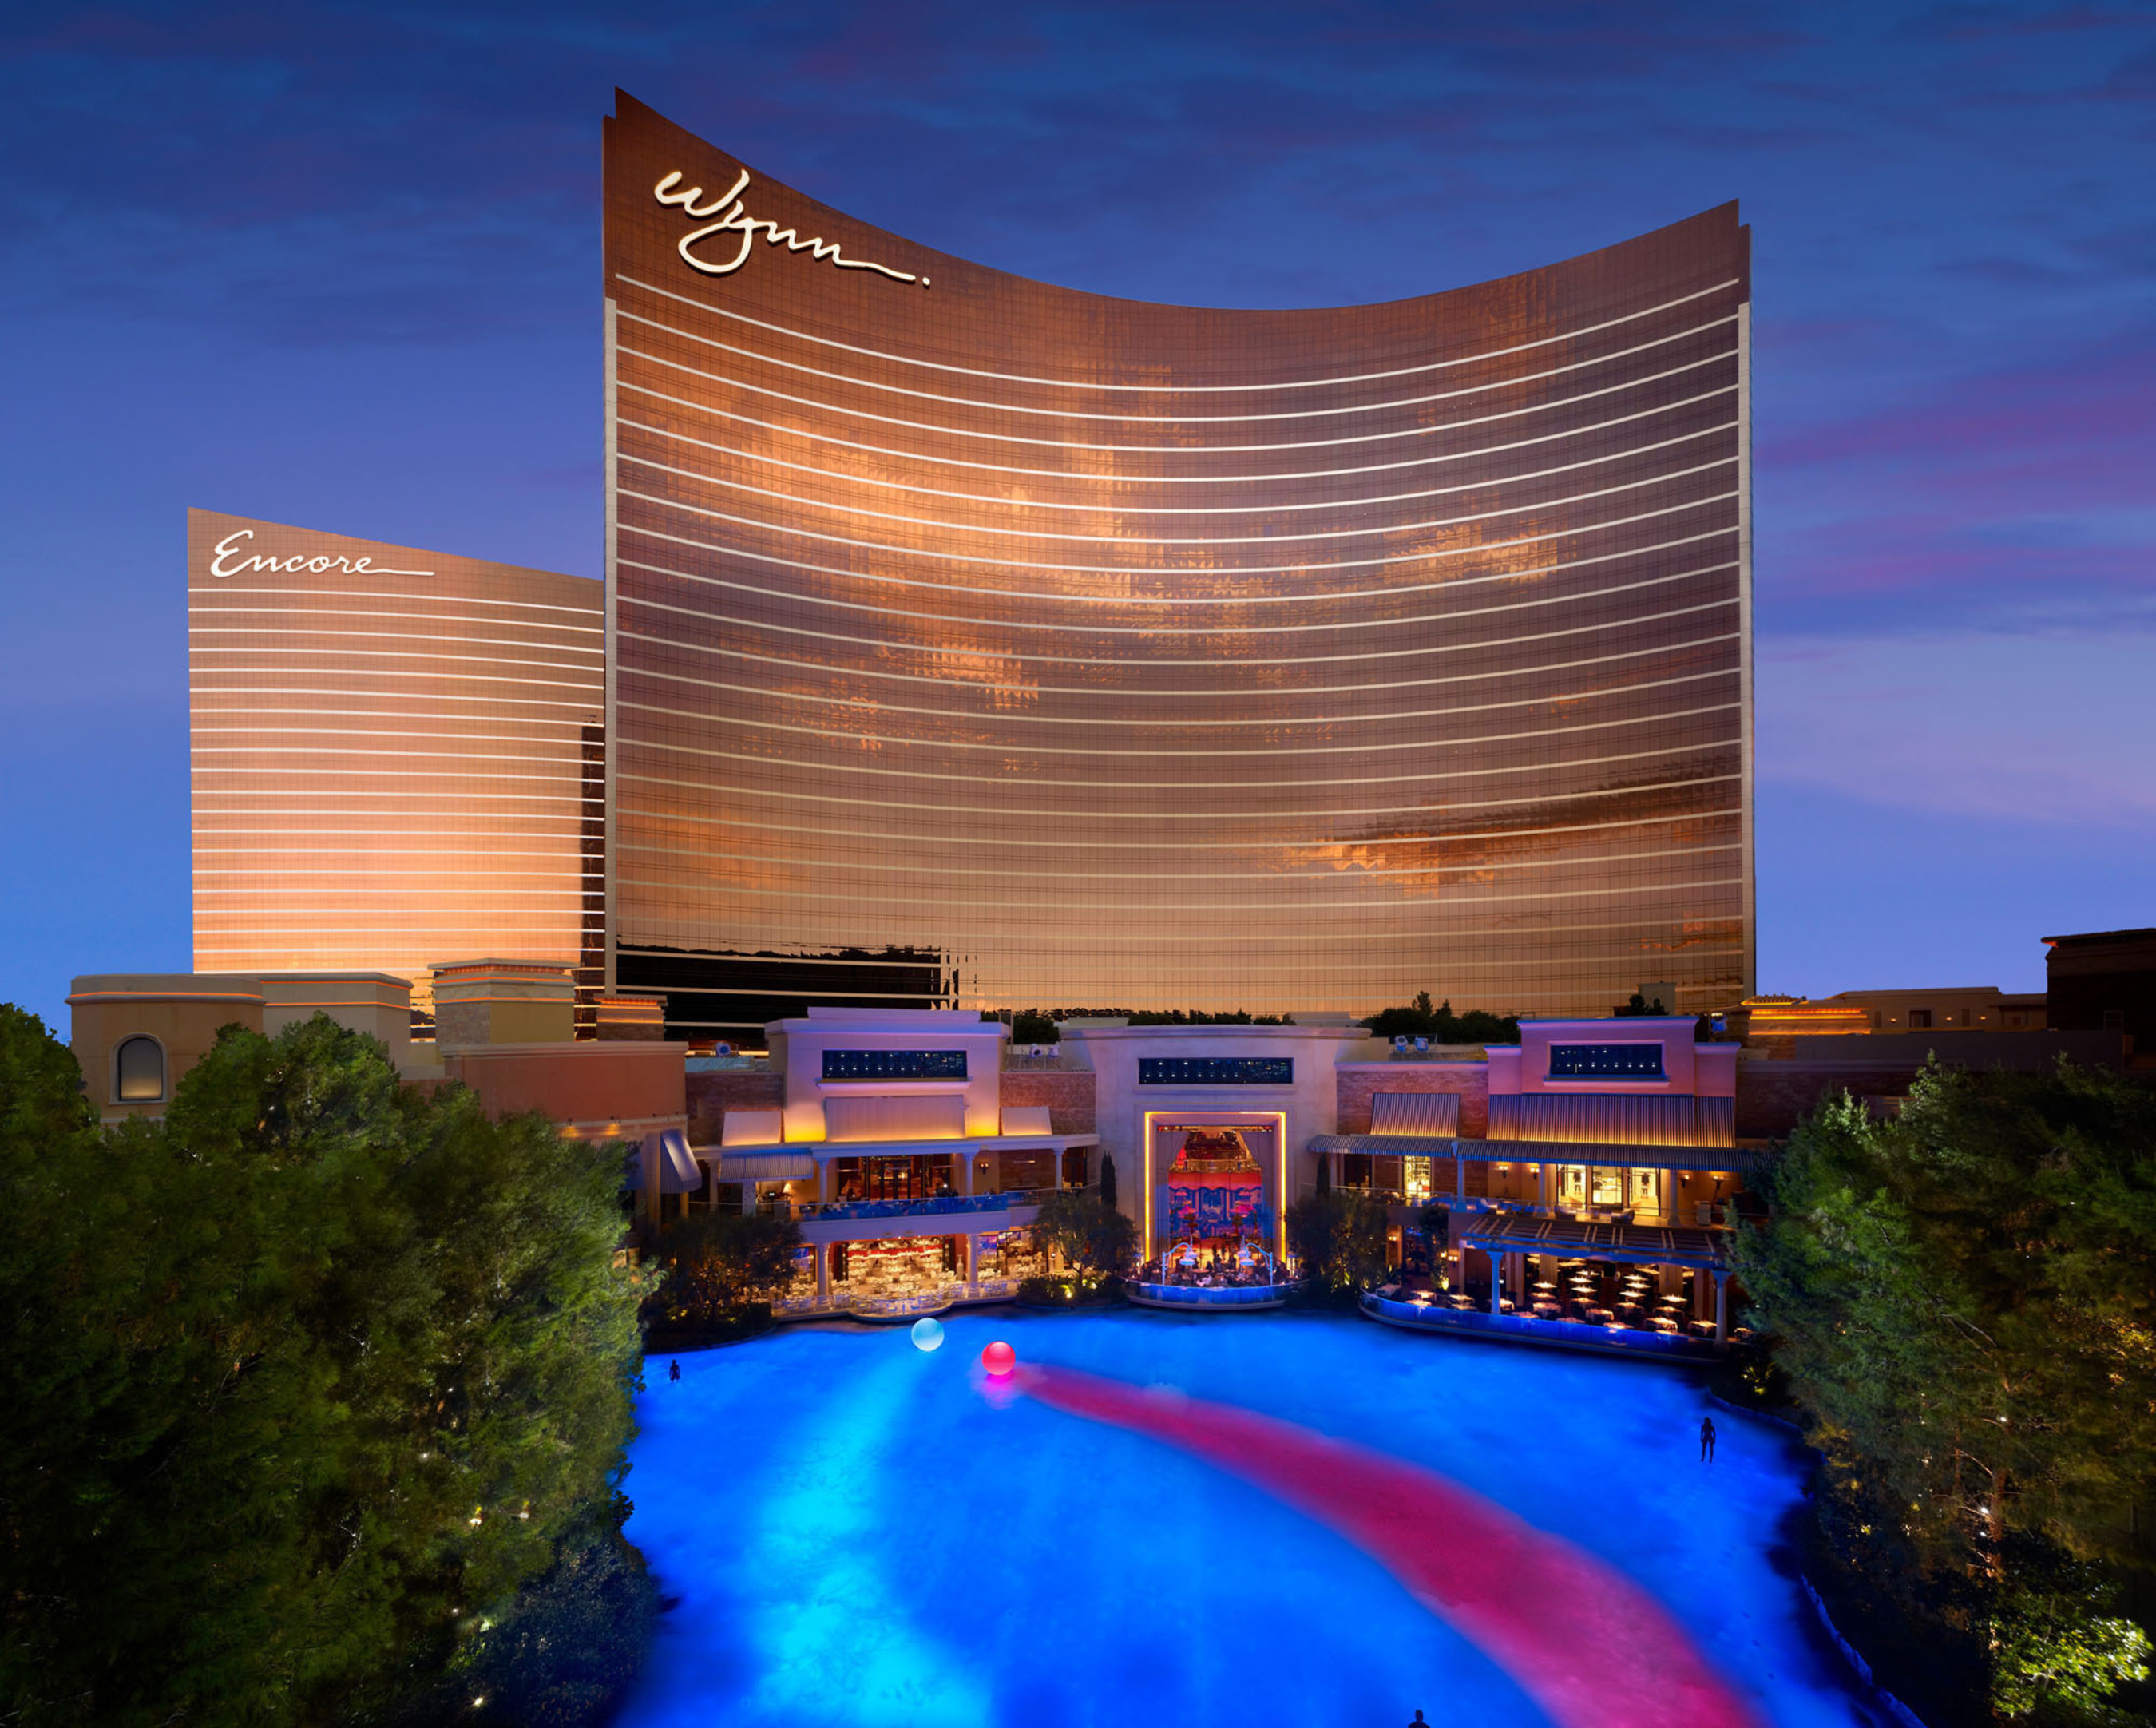 Conde Nast Traveler Readers Name Wynn Las Vegas and Encore the Number One Resort in Las Vegas for the Second Consecutive Year. (PRNewsFoto/Wynn Las Vegas) (PRNewsFoto/WYNN LAS VEGAS)